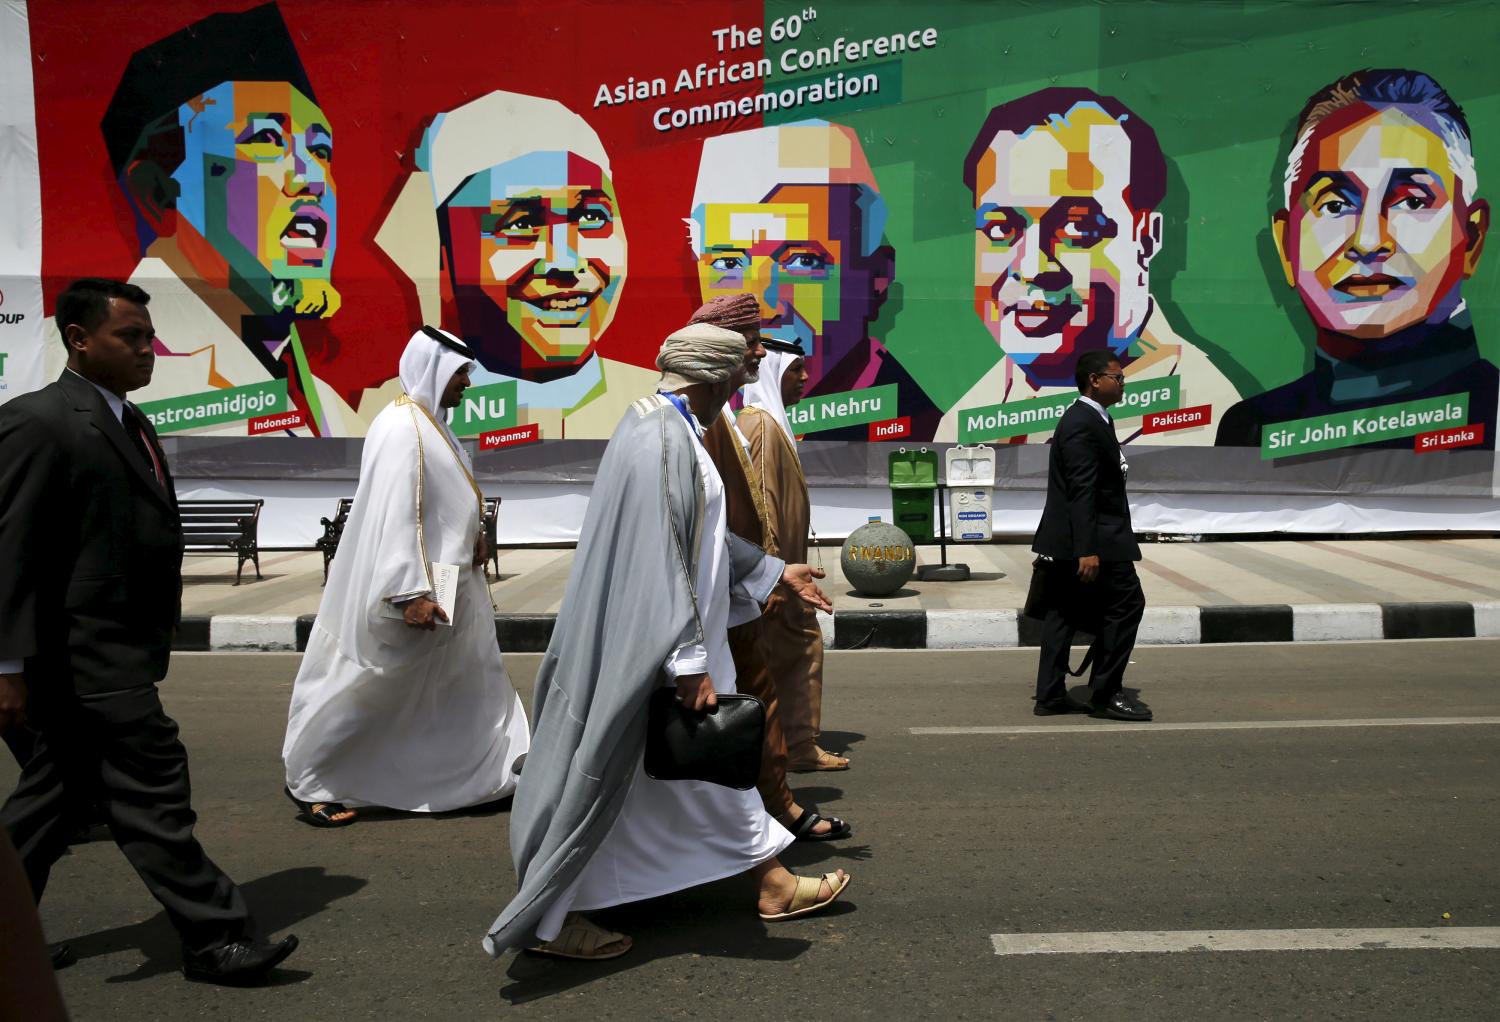 Delegates walk in front a poster of prominent attendees of the 1955 Asian-African Conference during a historical walk commemorating the 60-year anniversary of the Asian-African Summit, on Asia Afrika street in Bandung, Indonesia April 24, 2015. Leaders of Asian and African nations are in Jakarta to mark the 60th anniversary of a conference that made a developing-world stand against colonialism and led to the Cold War era's non-aligned movement.